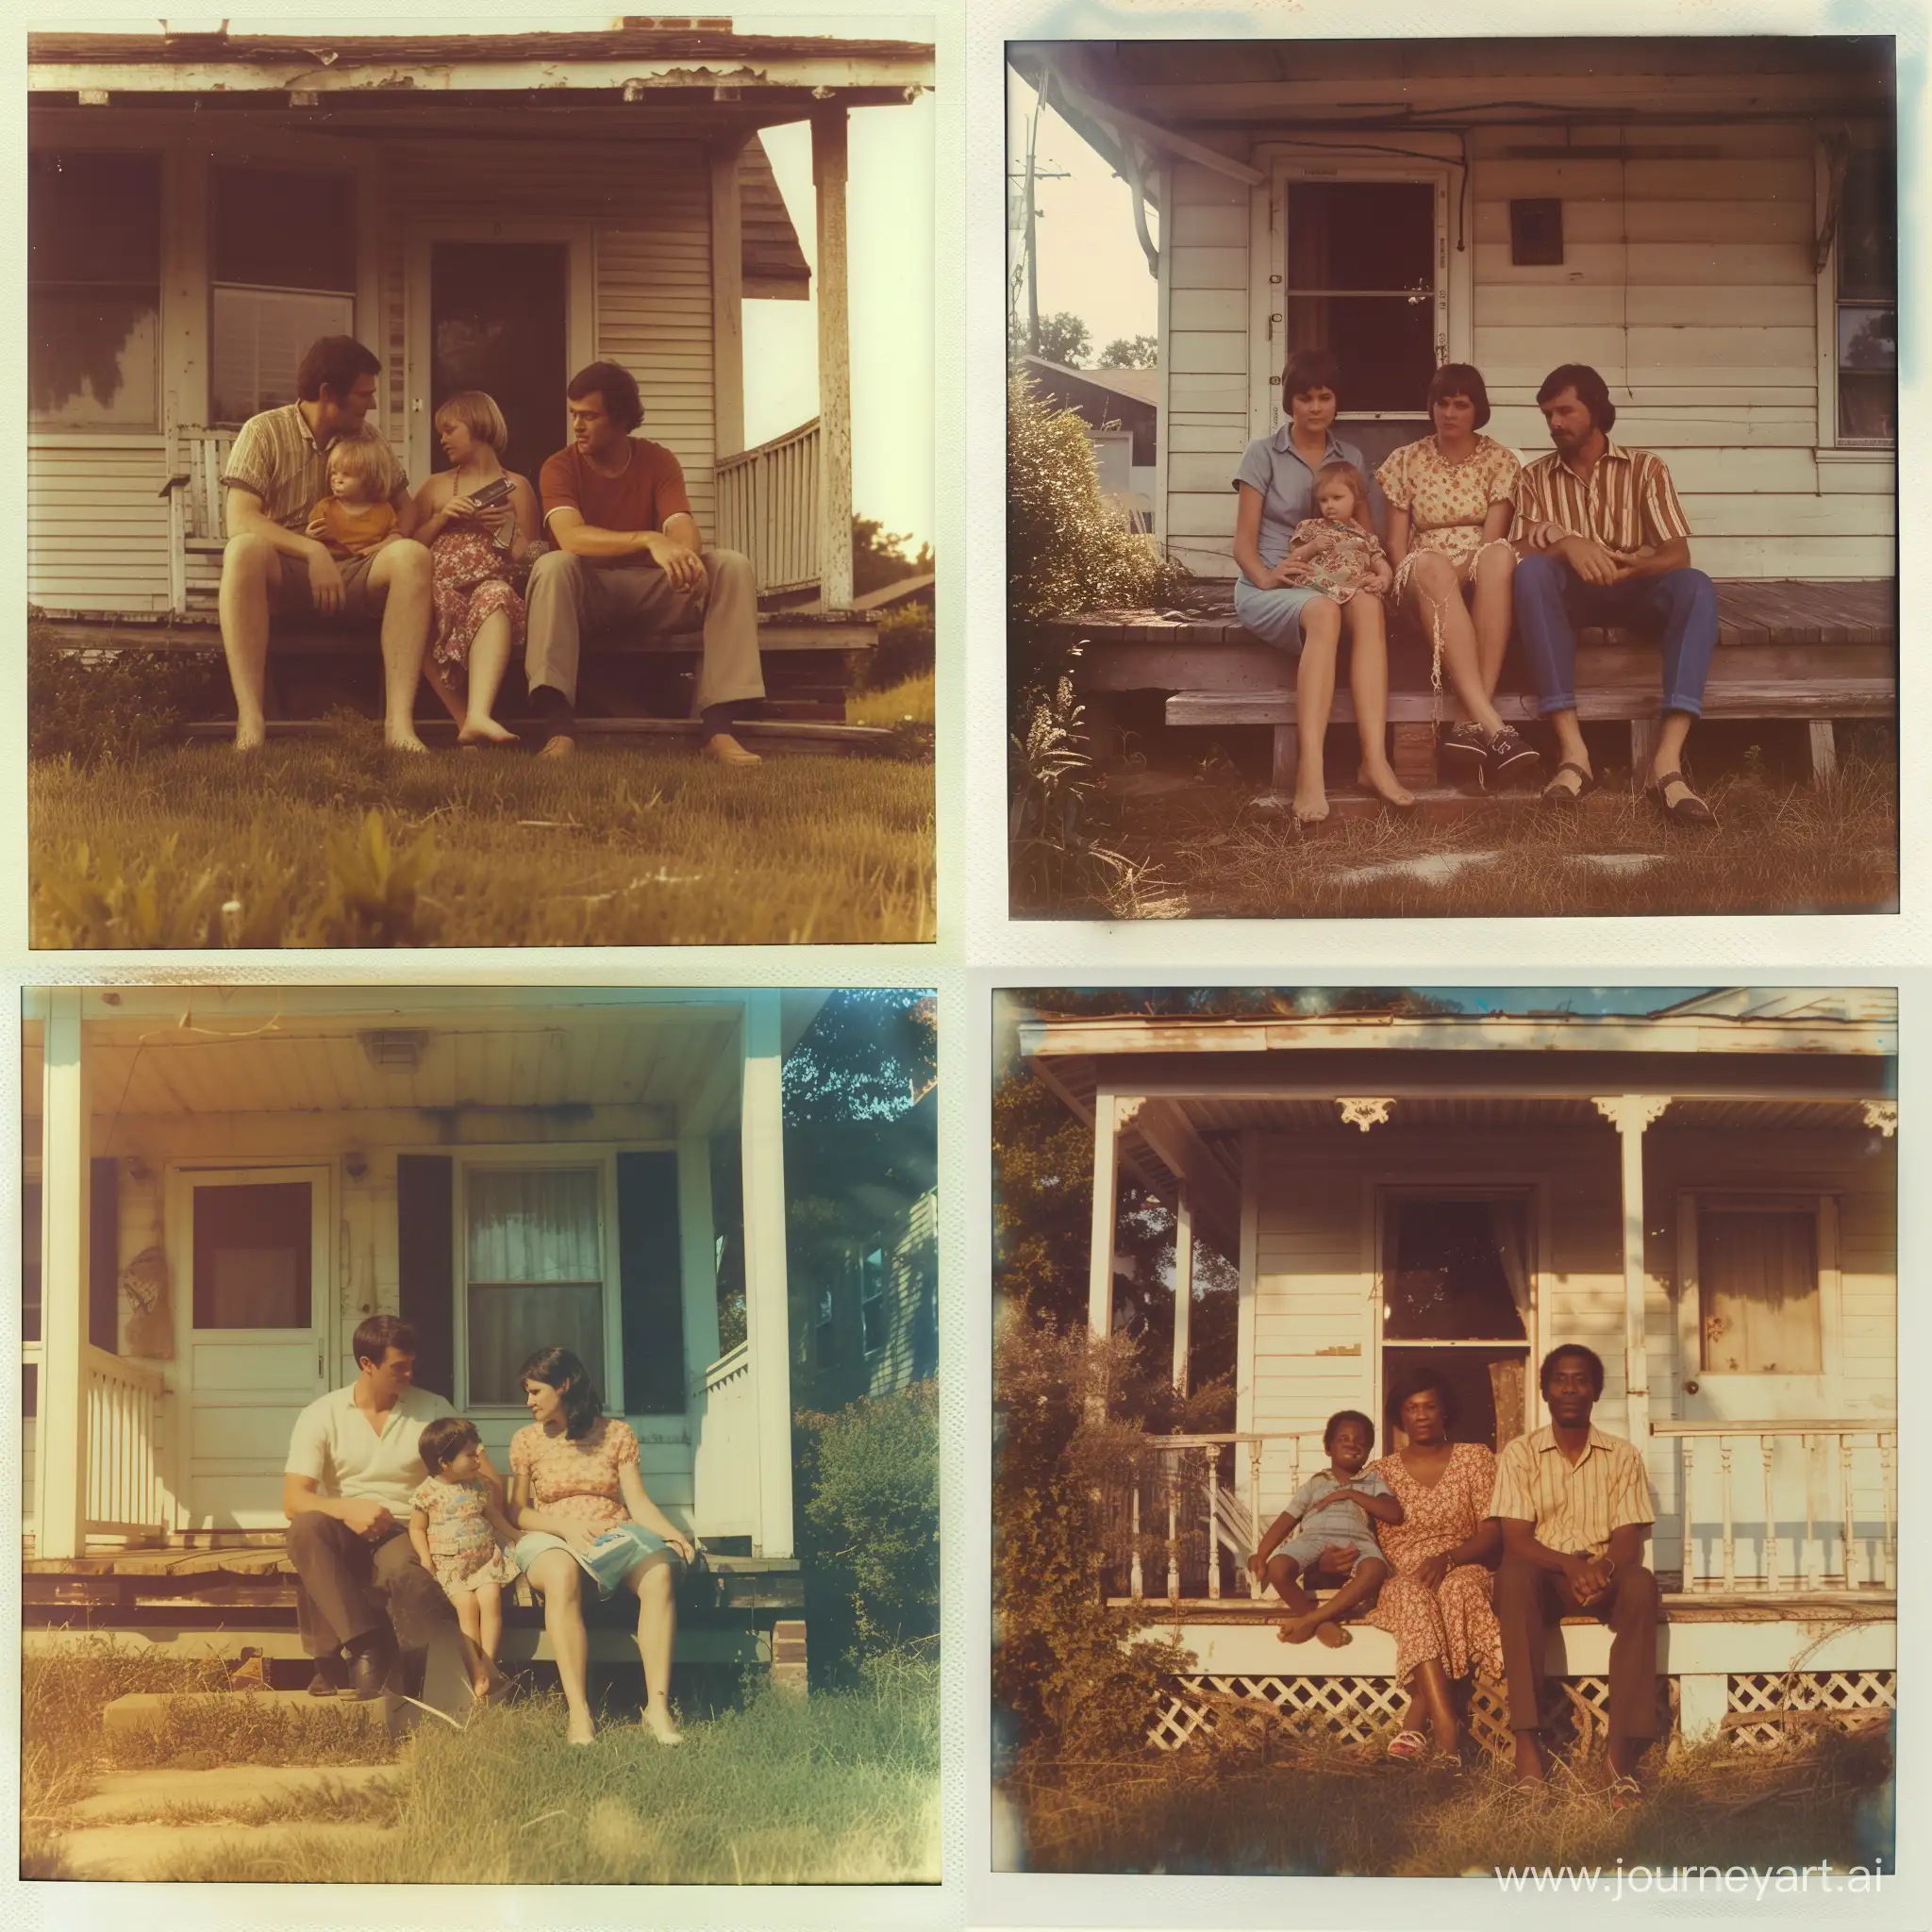 Nostalgic-Family-Gathering-on-1970s-Porch-Late-Summer-Afternoon-Bliss